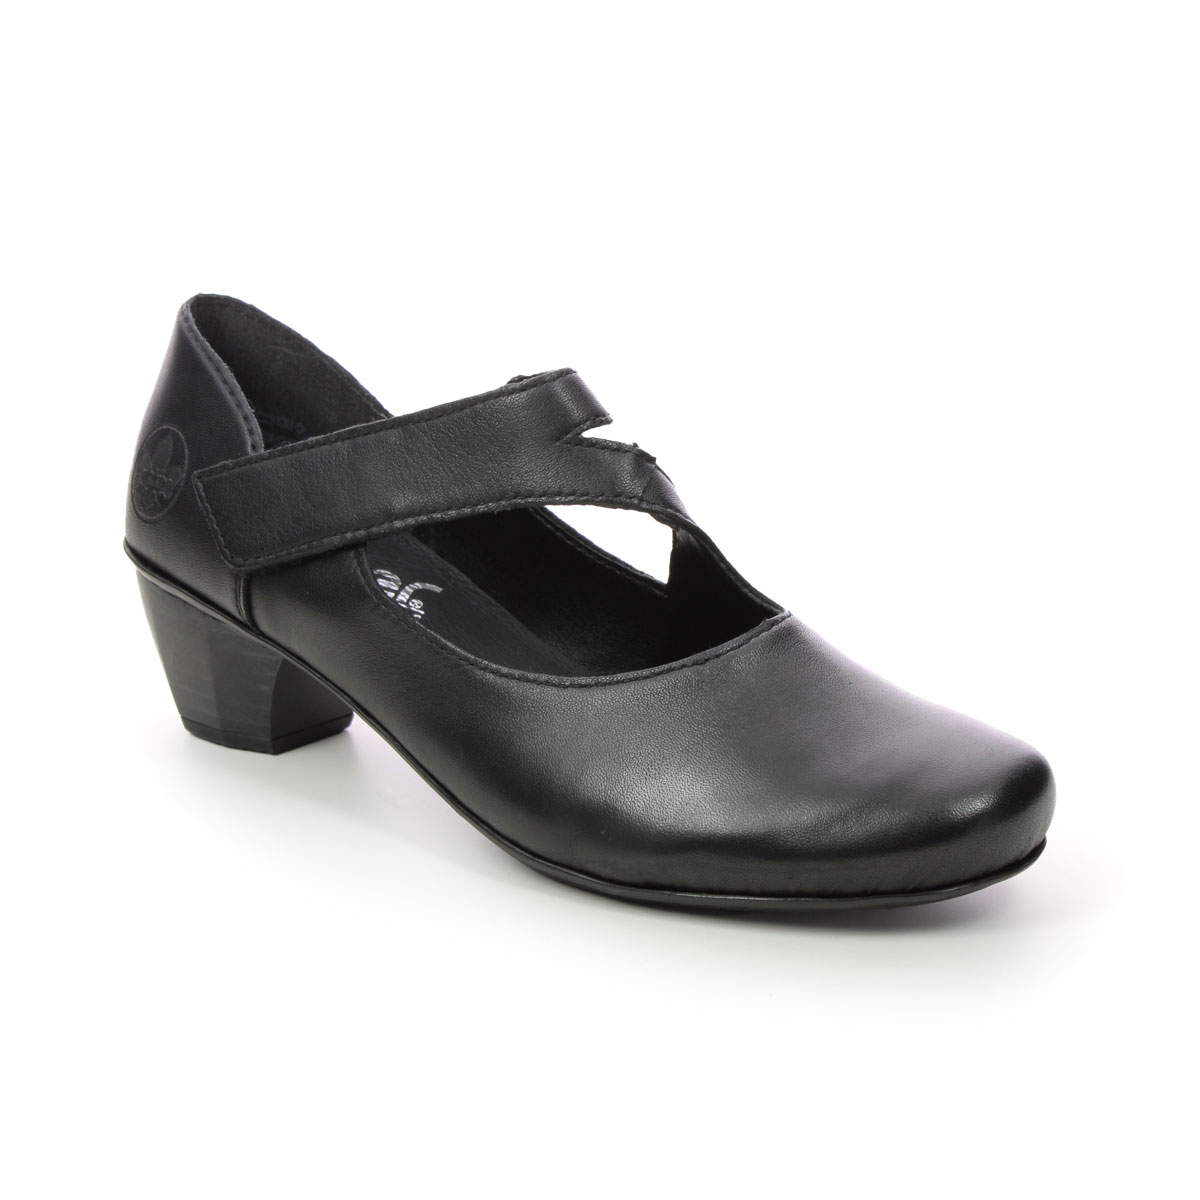 Rieker 41793-02 Black Womens Mary Jane Shoes in a Plain Leather and Man-made in Size 37